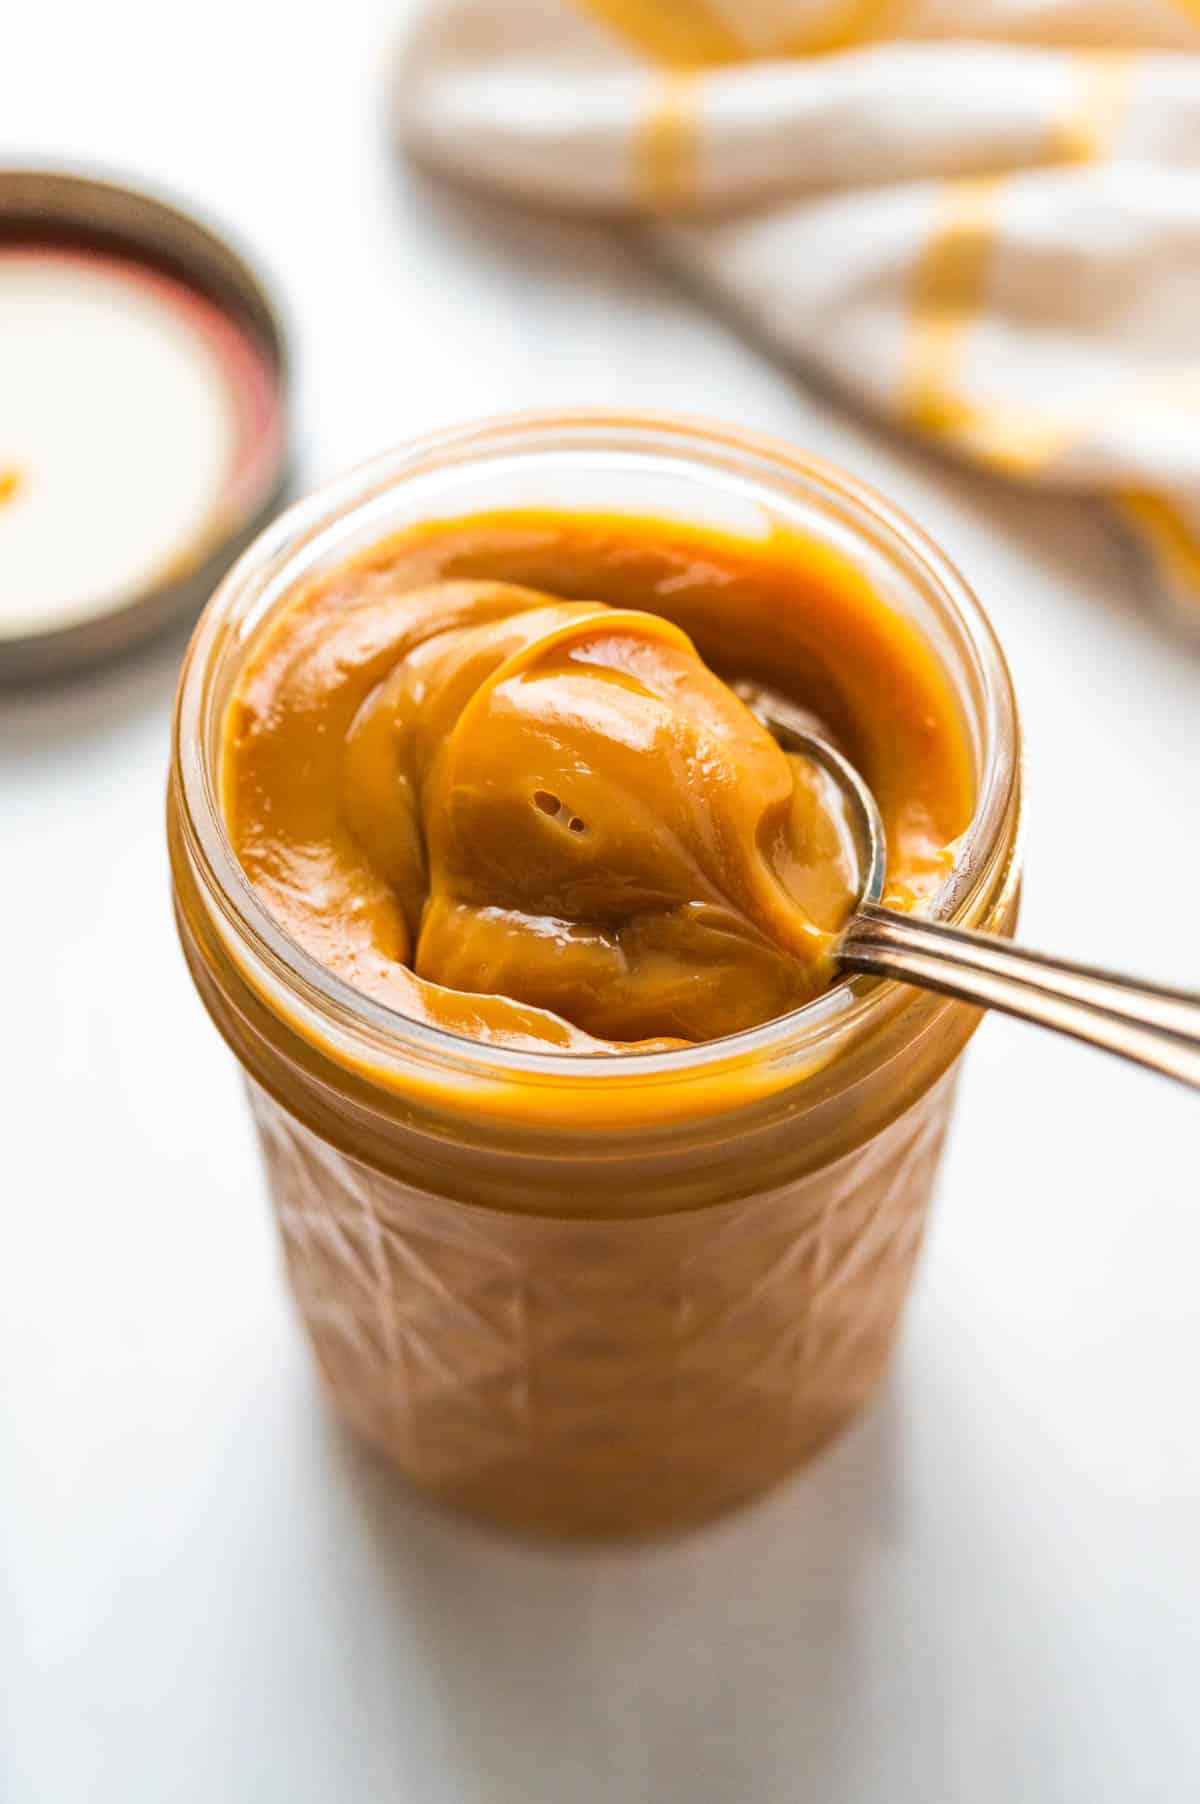 A jar of the dulce de leche with a spoon dipped in.